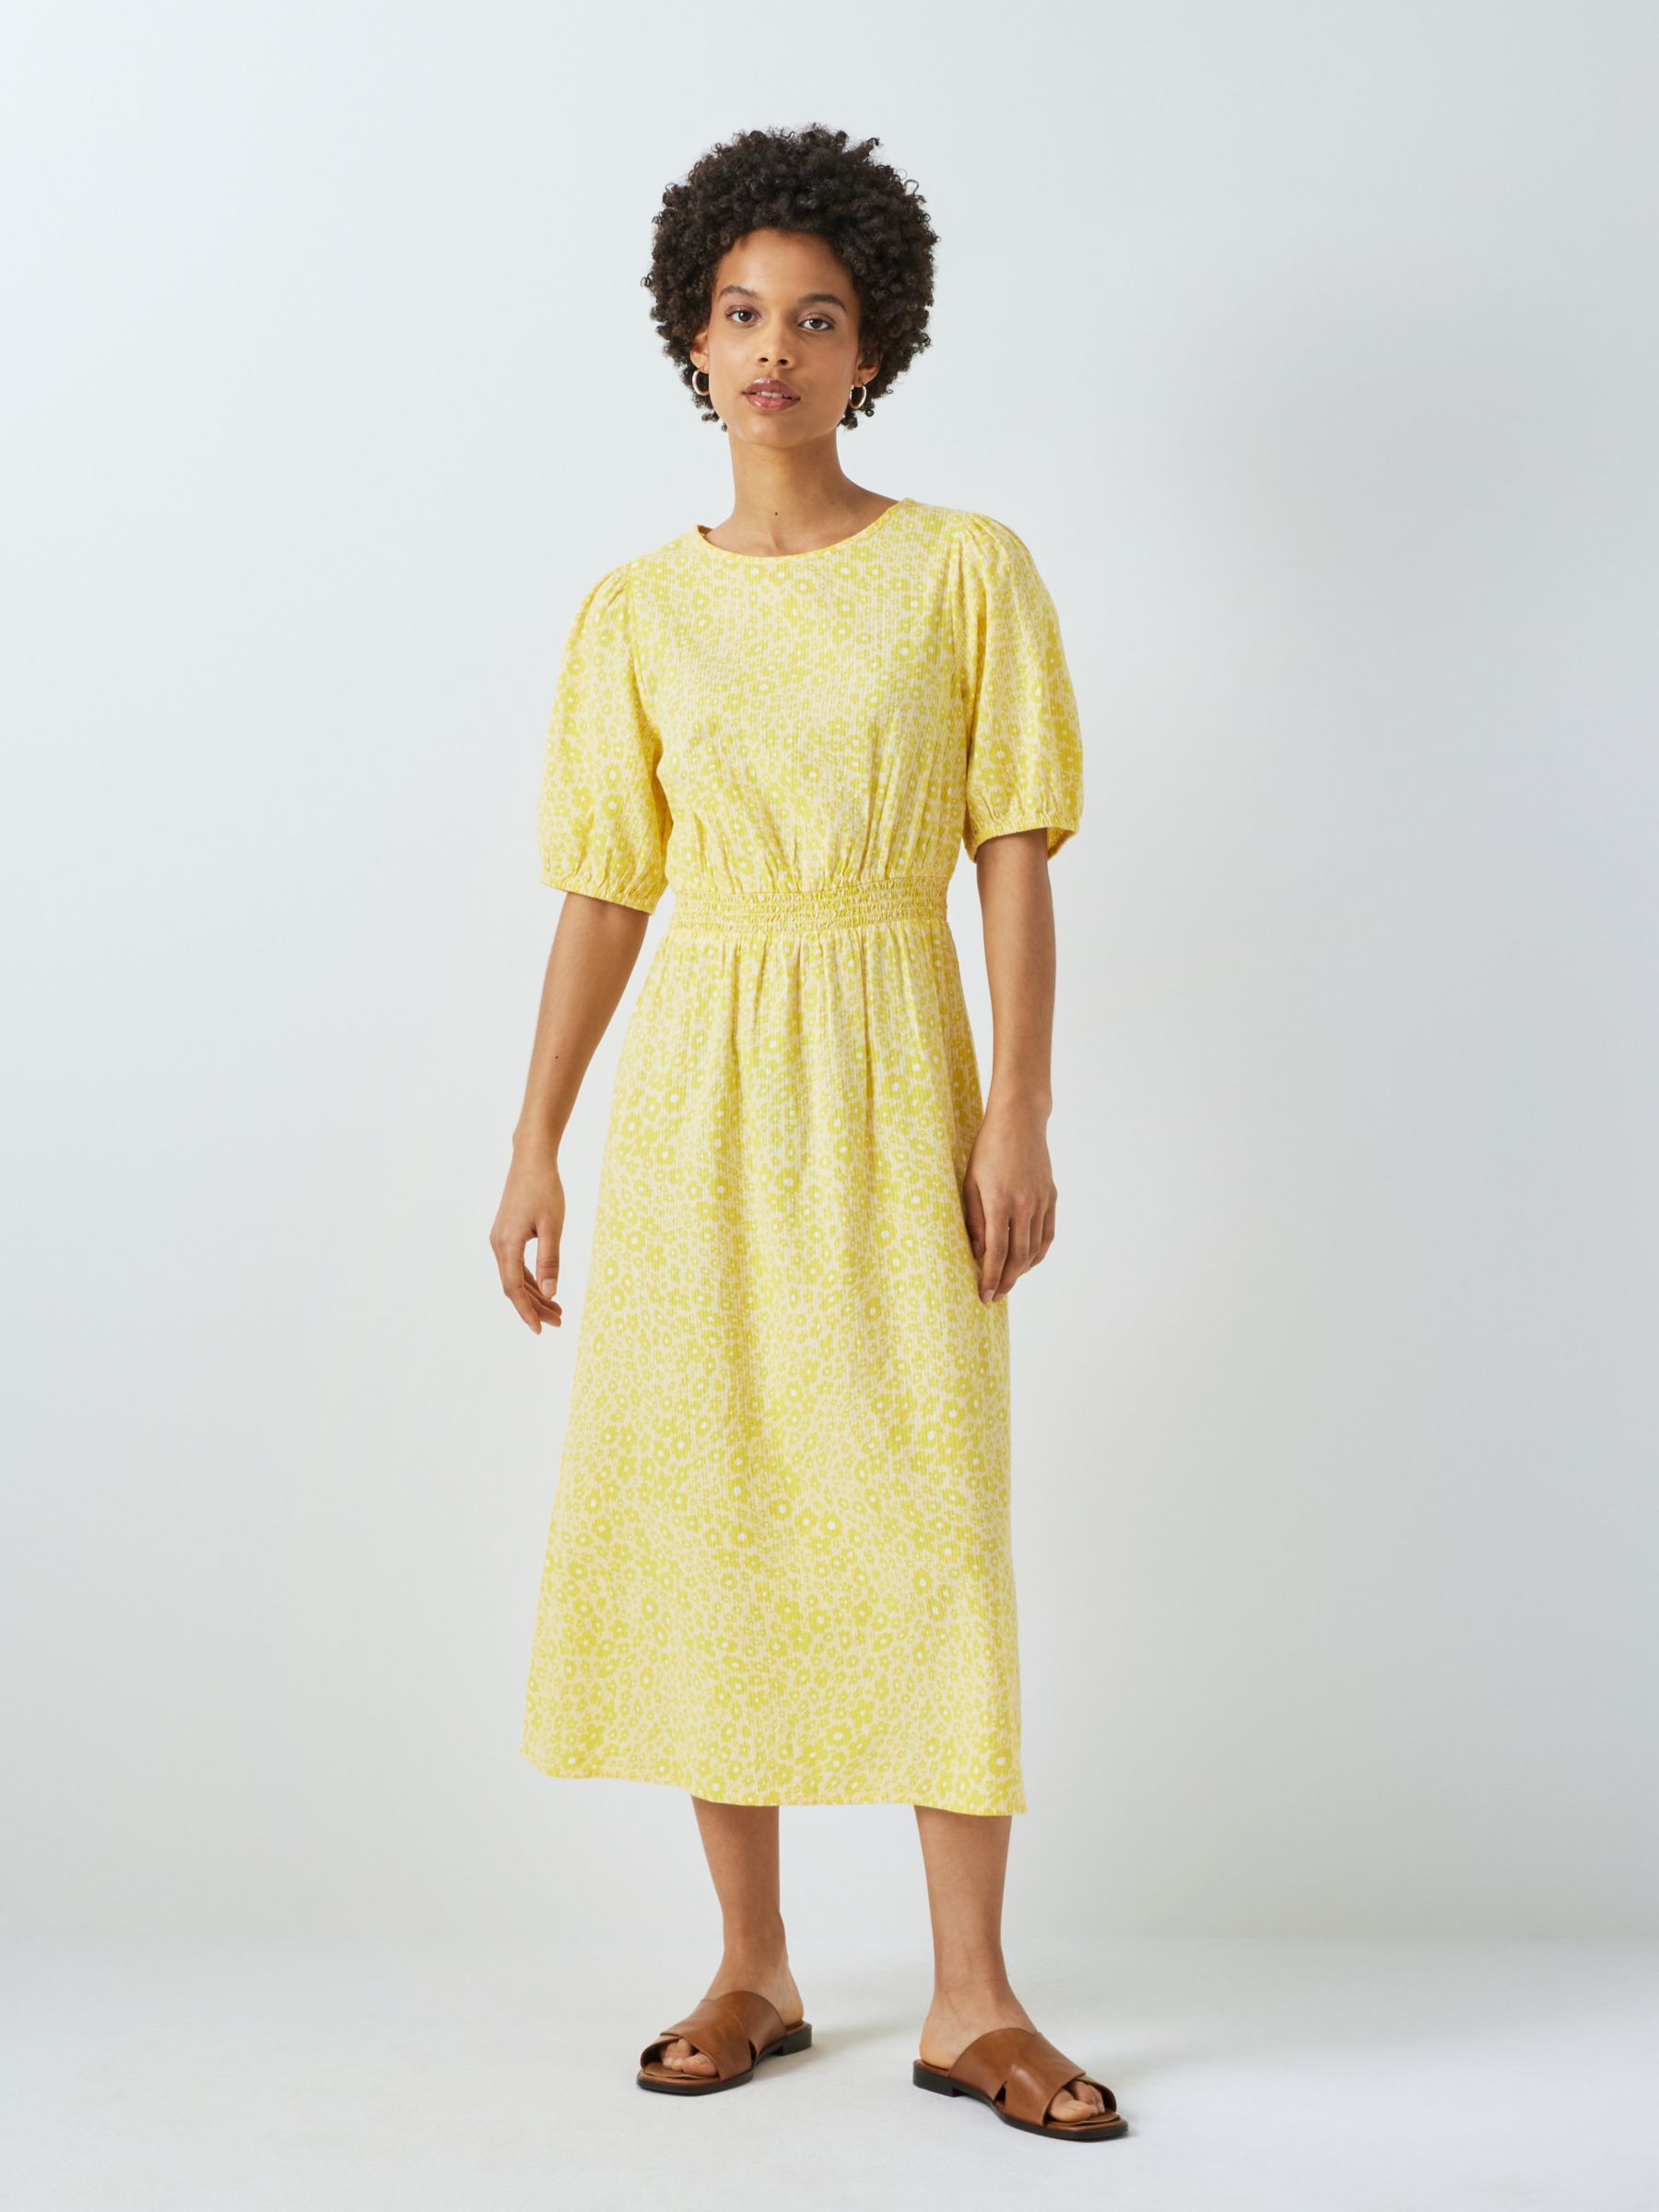 Pastel Yellow Puff Sleeve Floral Lace Daisy Dress